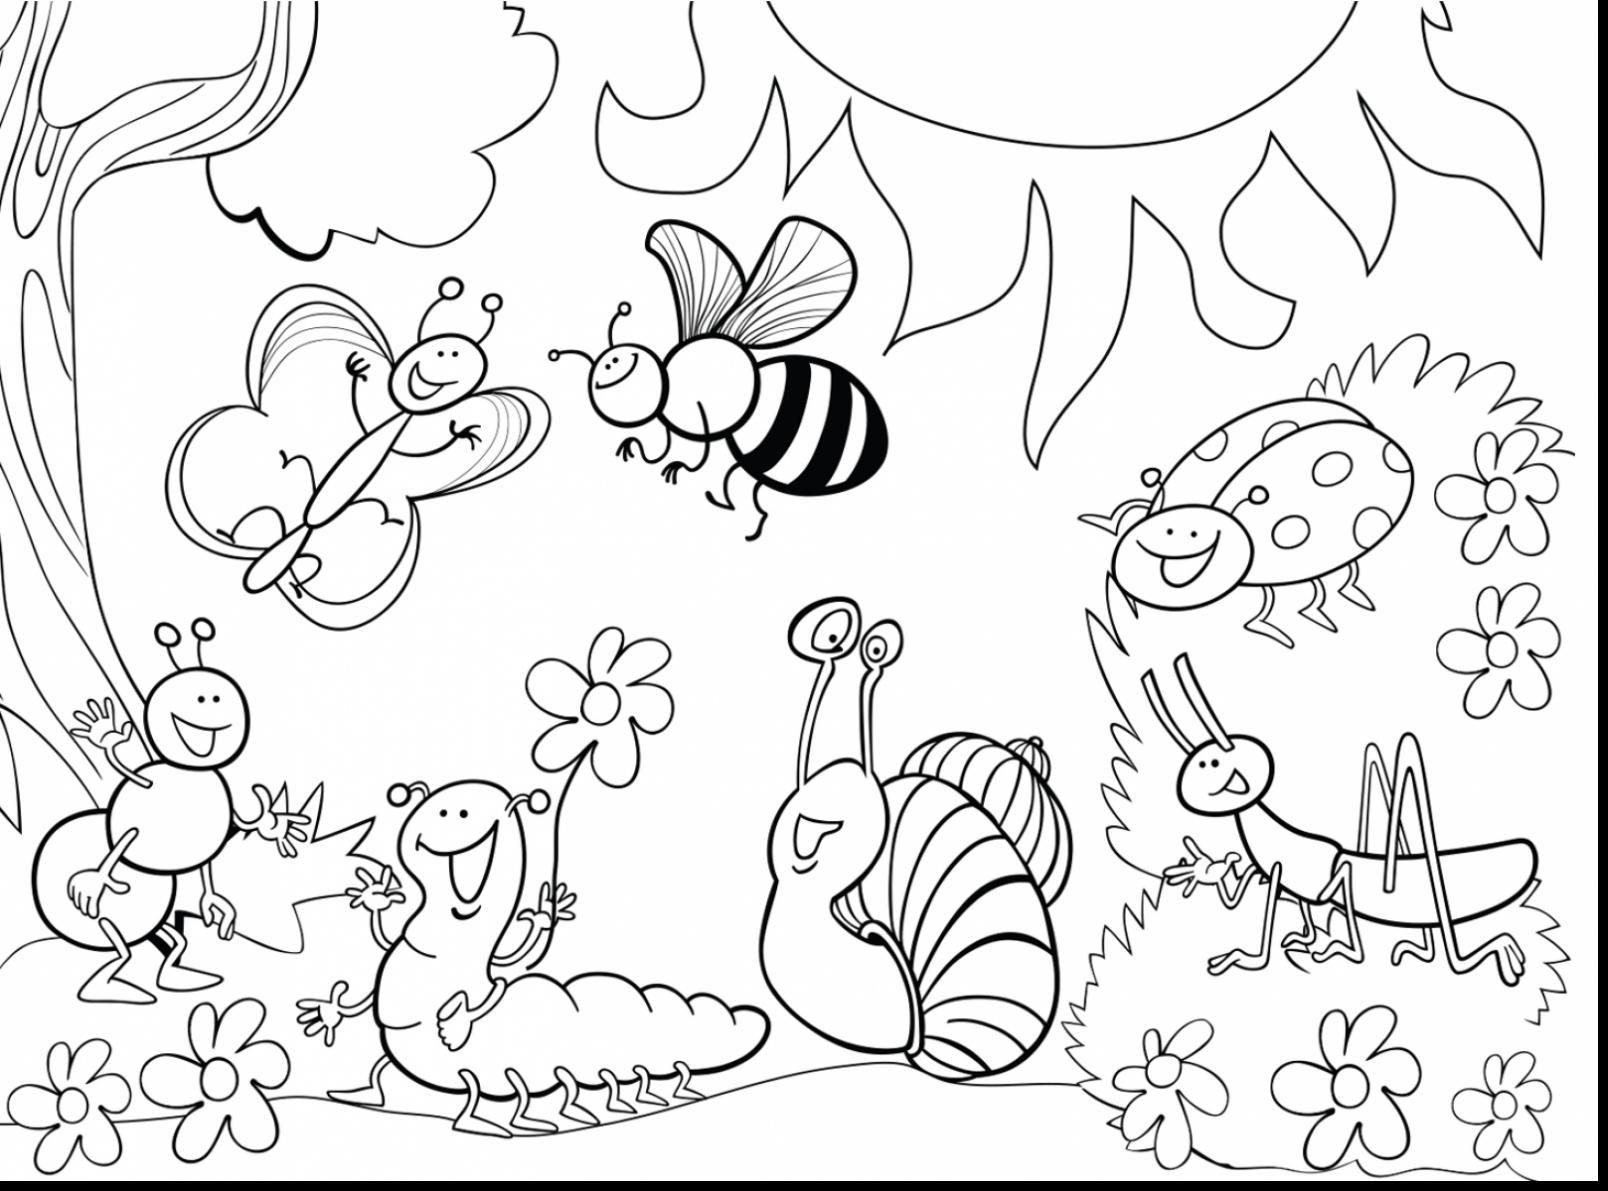 Bug Coloring Pages For Kids
 Insect Coloring Page Impressive Printable Insect Coloring